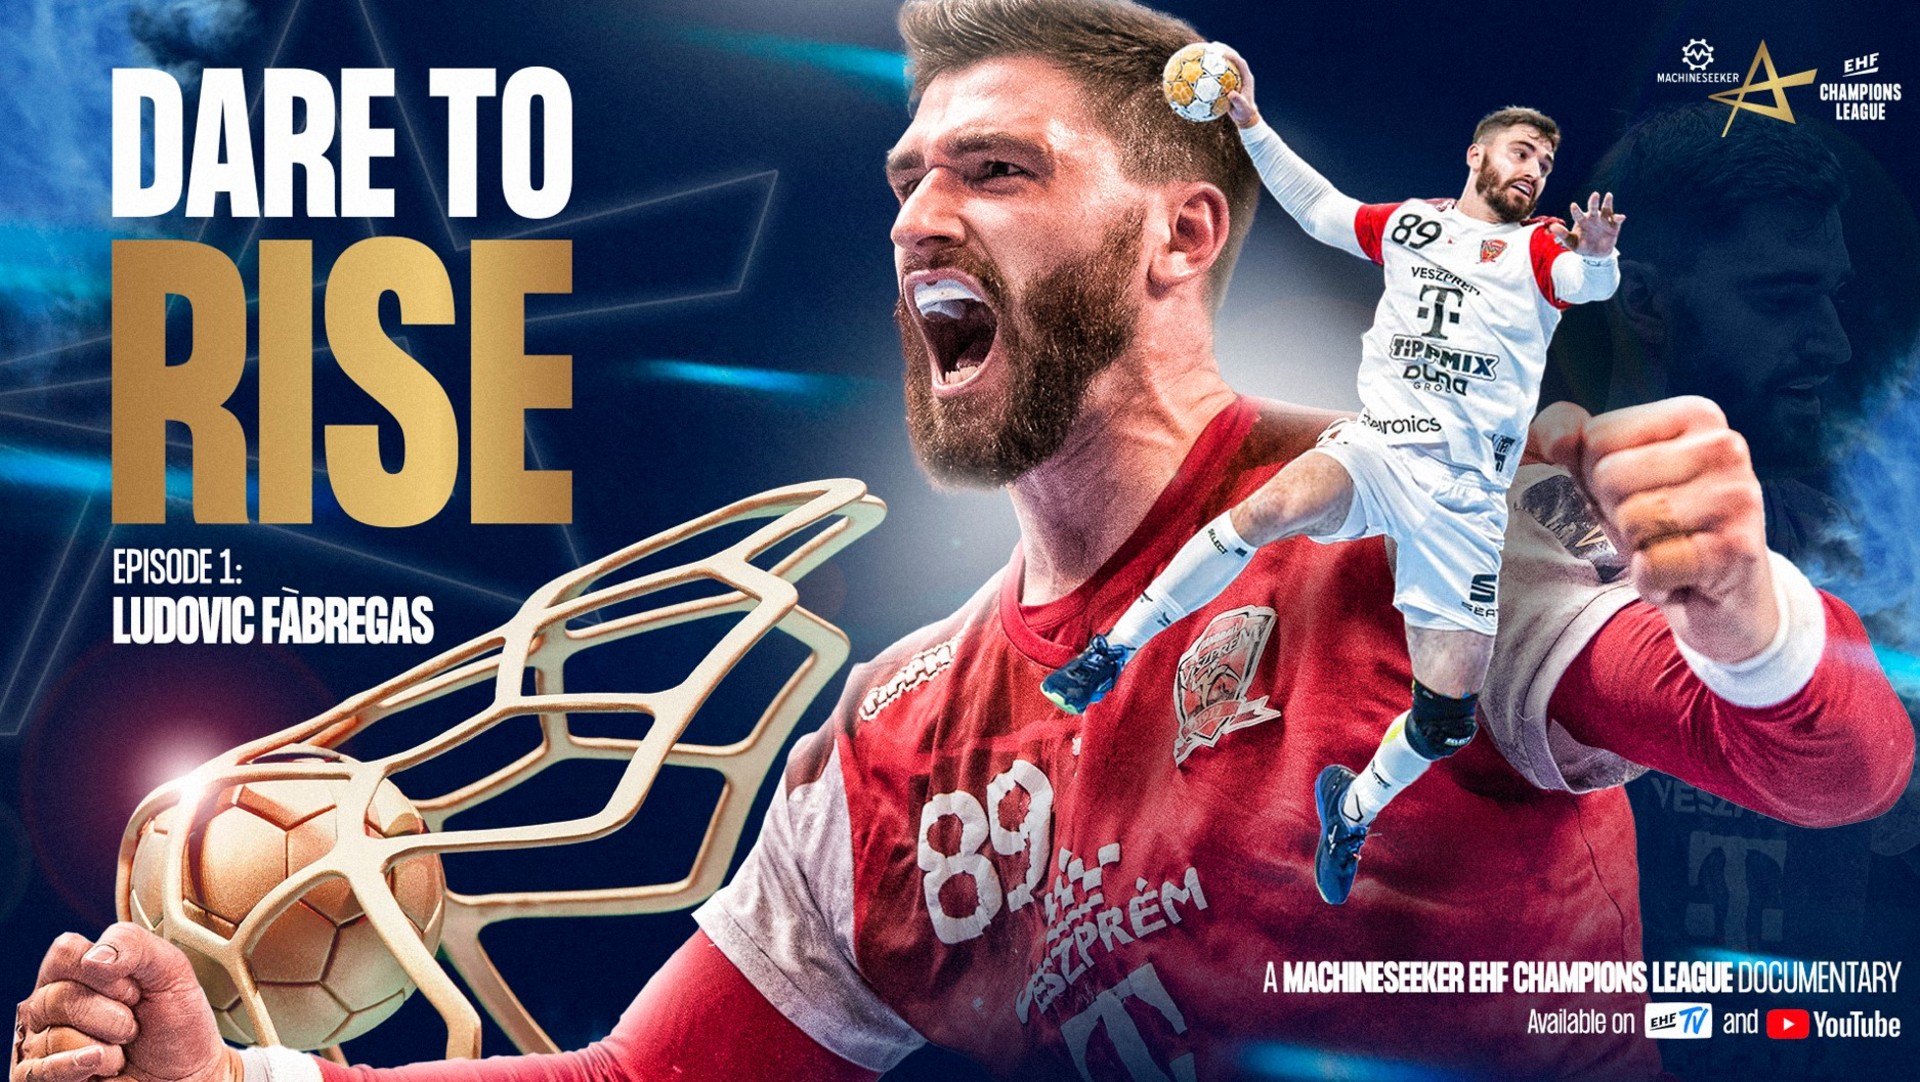 Coverage of EHF Champions League Men 2021/22 round 6